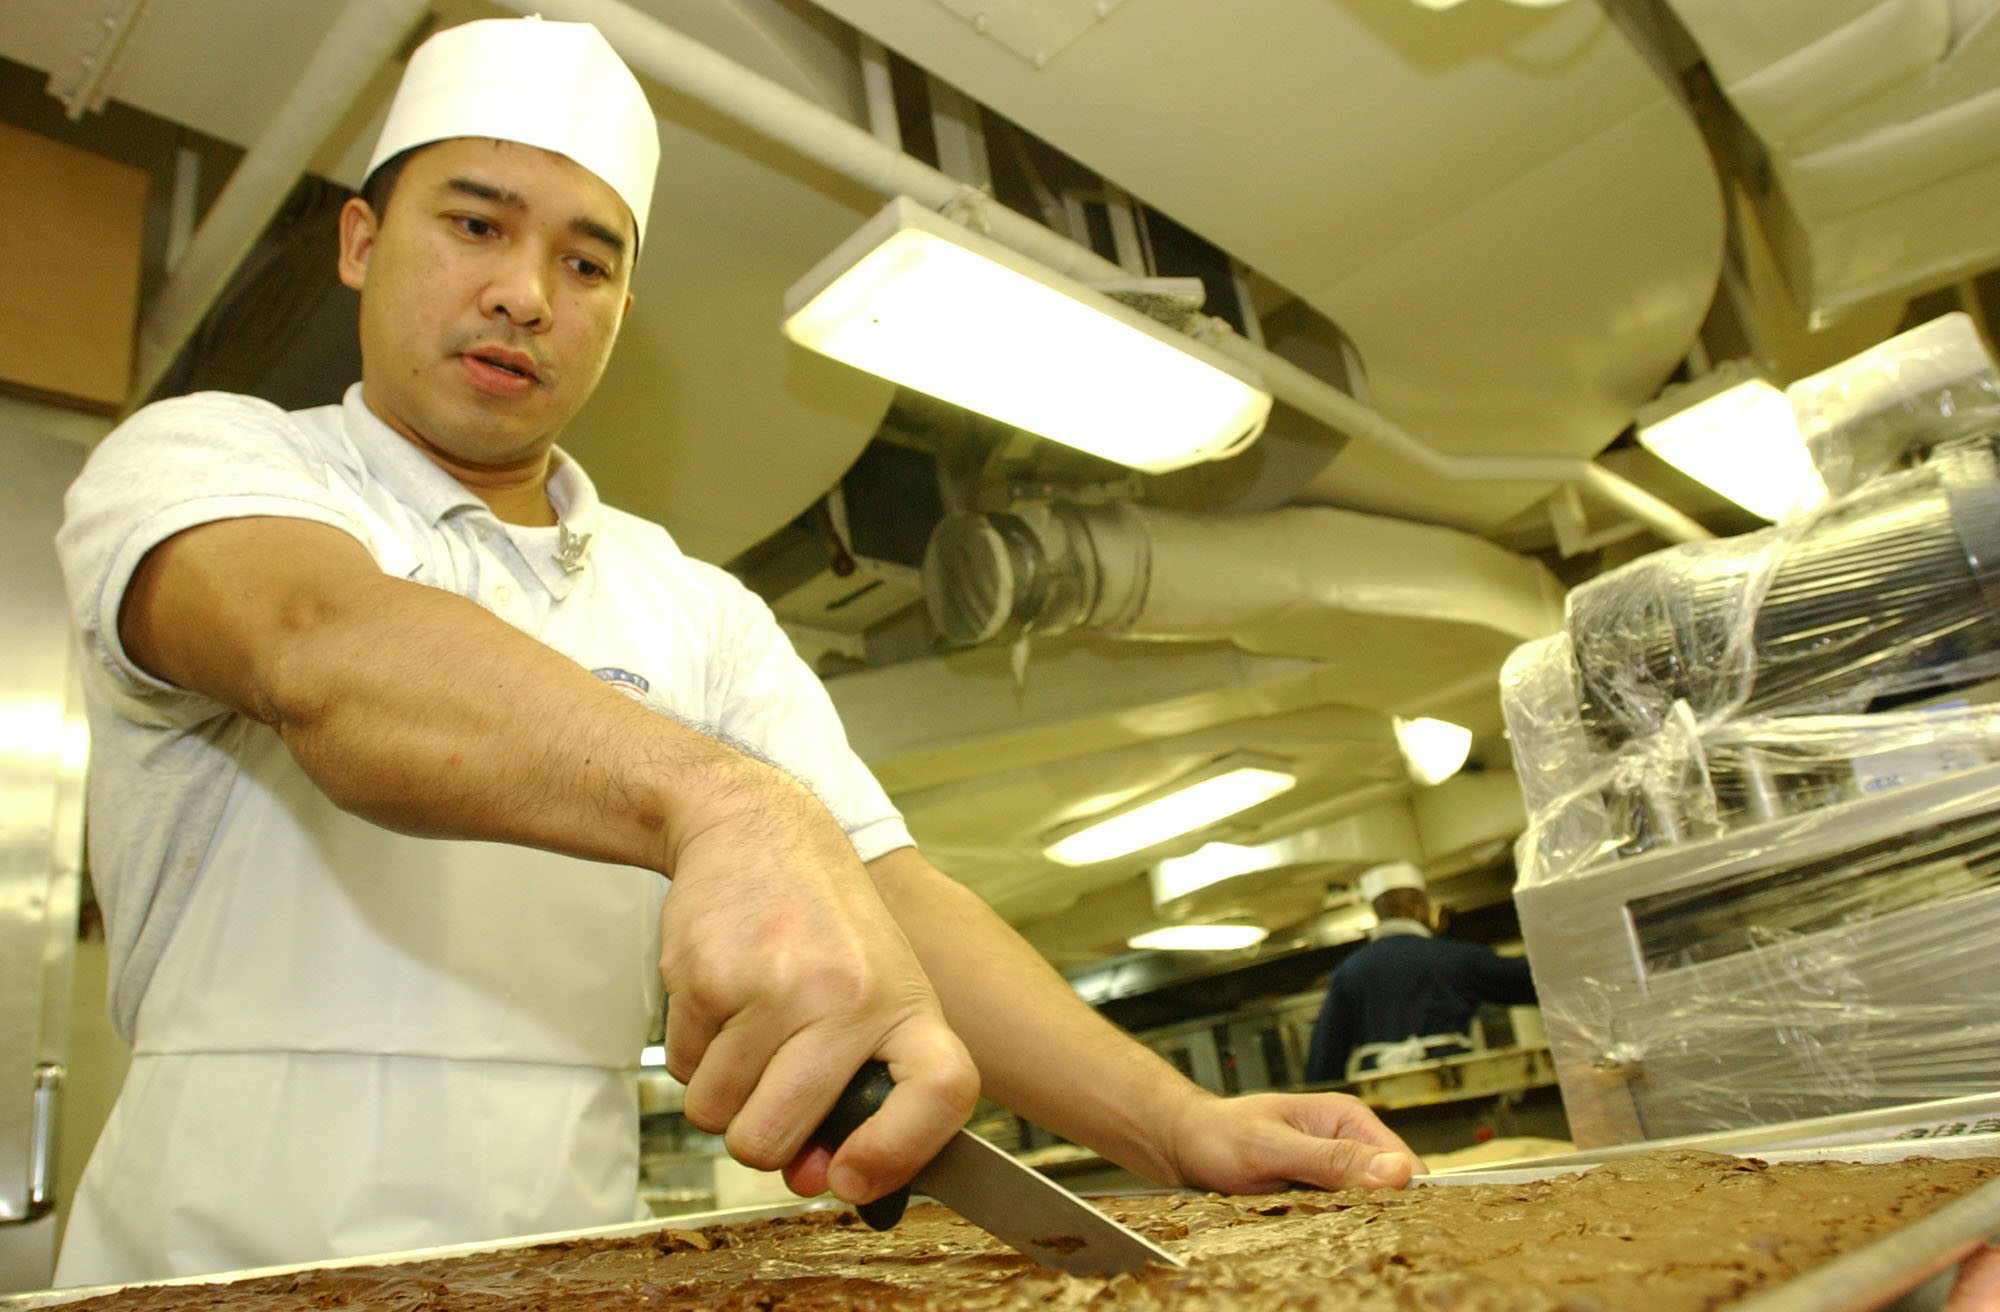 US Navy 030405-N-4768W-016 Mess Management Specialist 3rd Class Jess Vistro, from Oxnard, Calif., prepares chocolate brownies for the crew